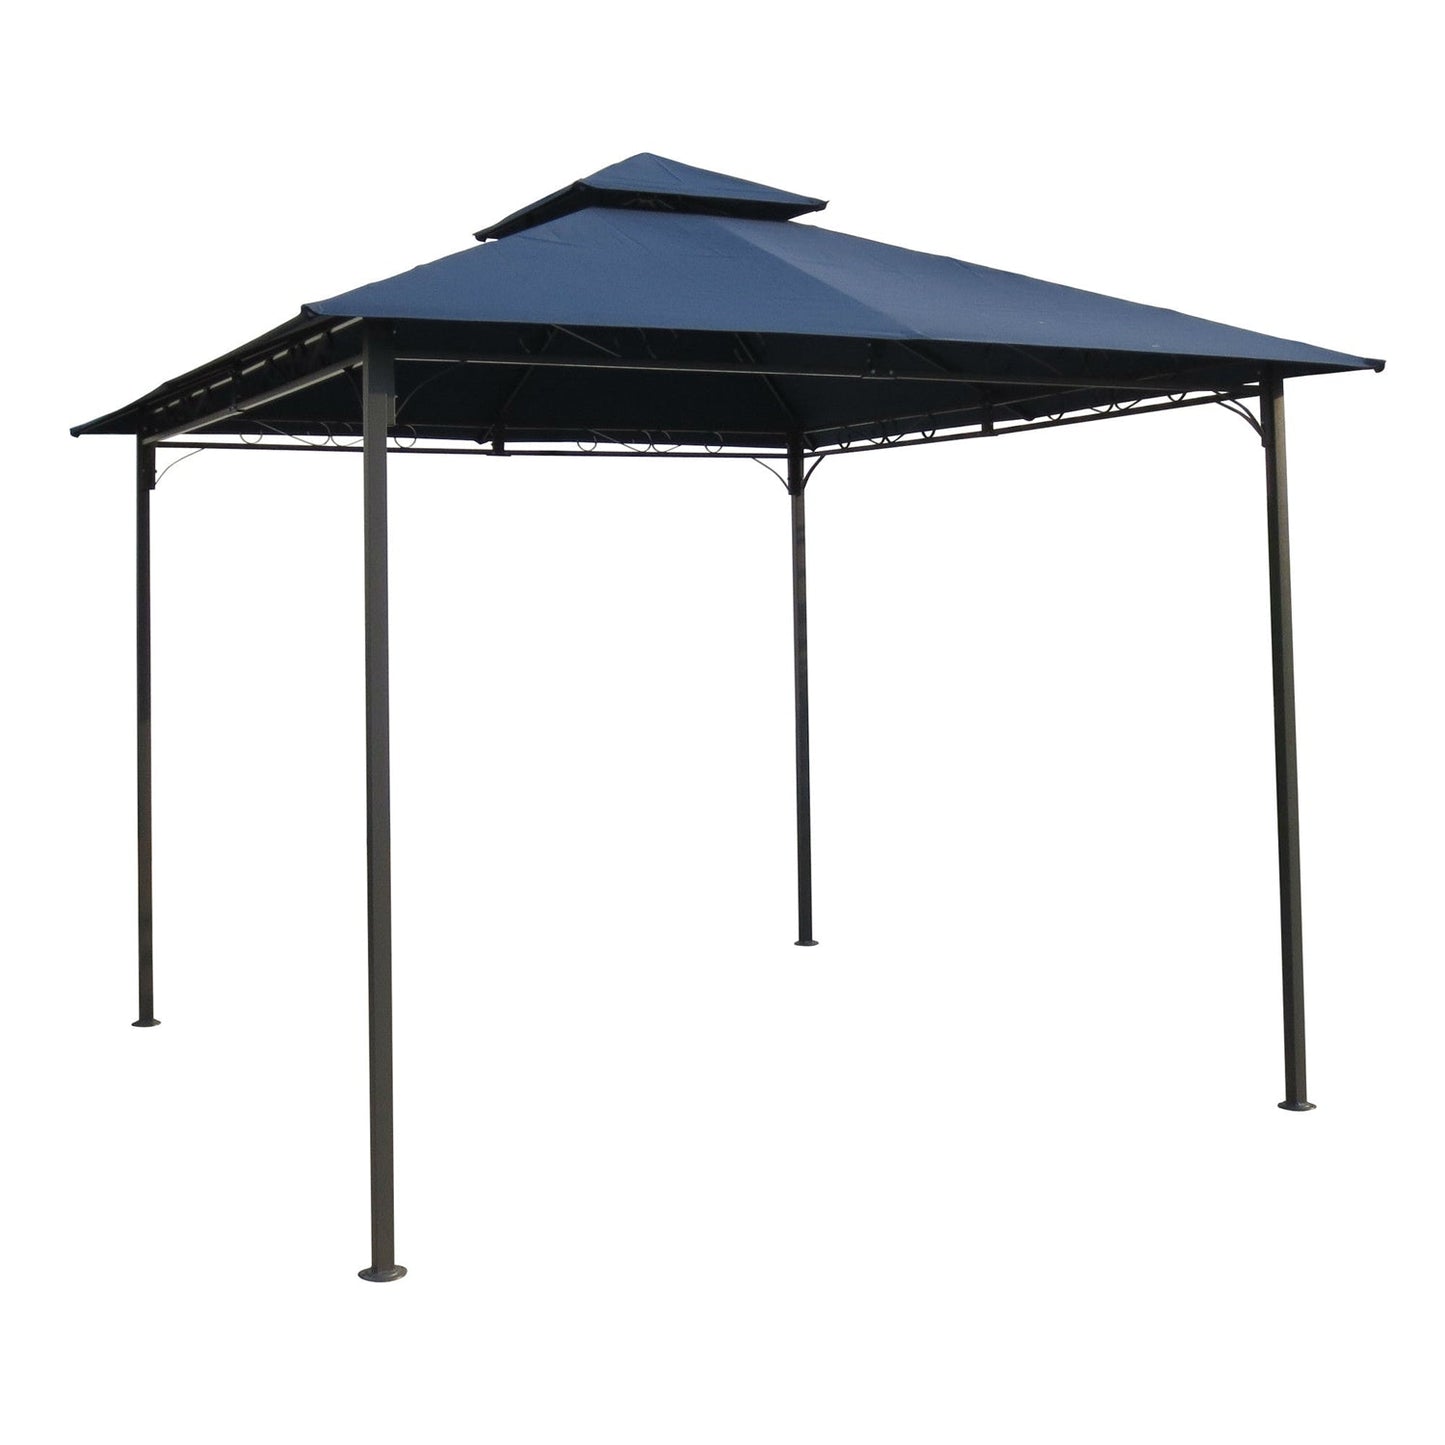 10Ft x 10Ft Outdoor Garden Gazebo with Iron Frame and Navy Blue Canopy-Novel Home